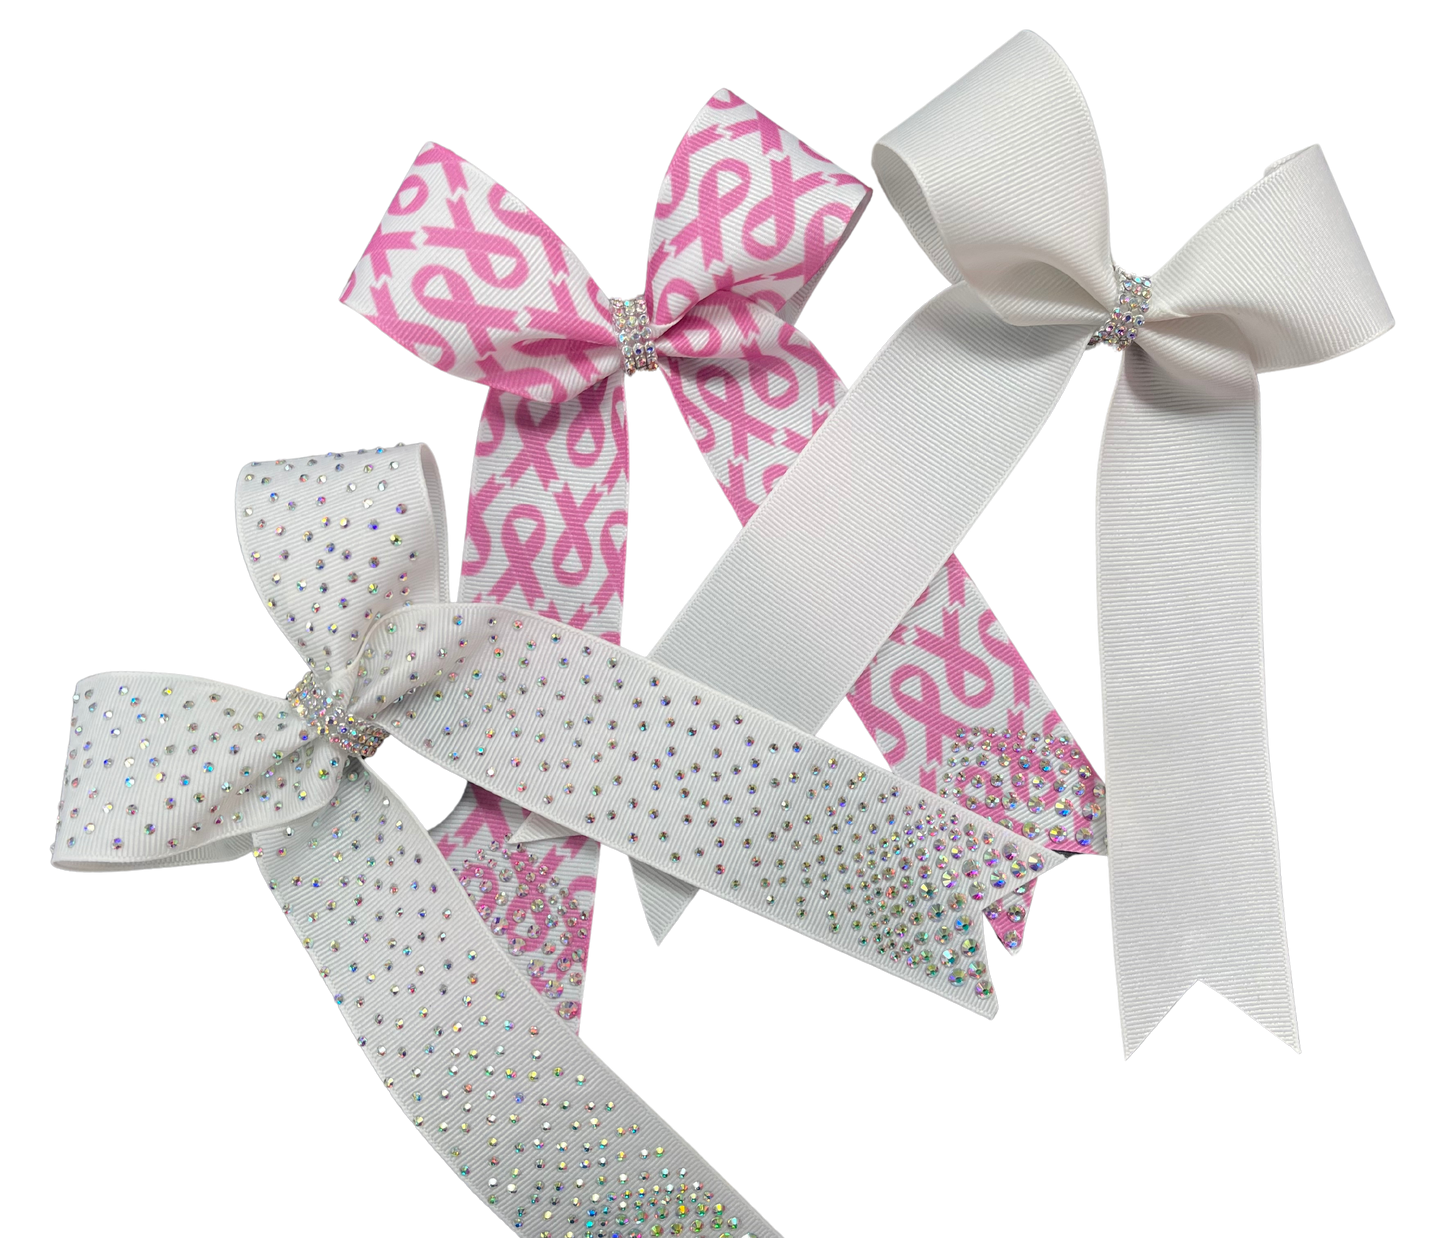 BAB School Package (3 College Bows)